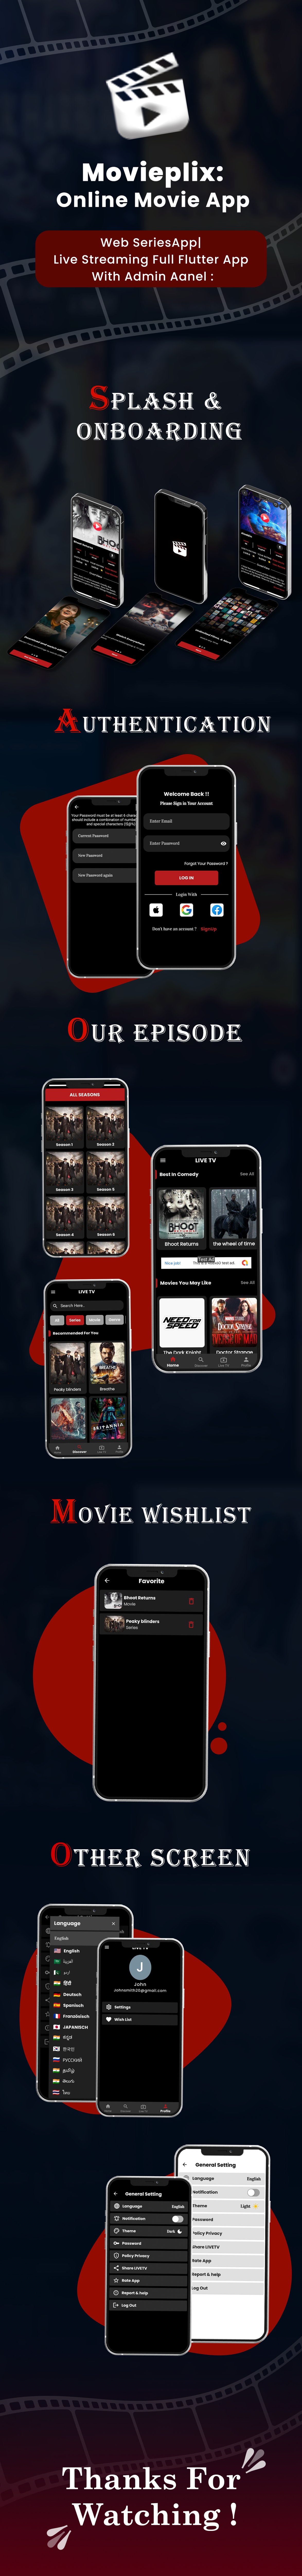 Online Movie Live Tv App With Php Admin Panel